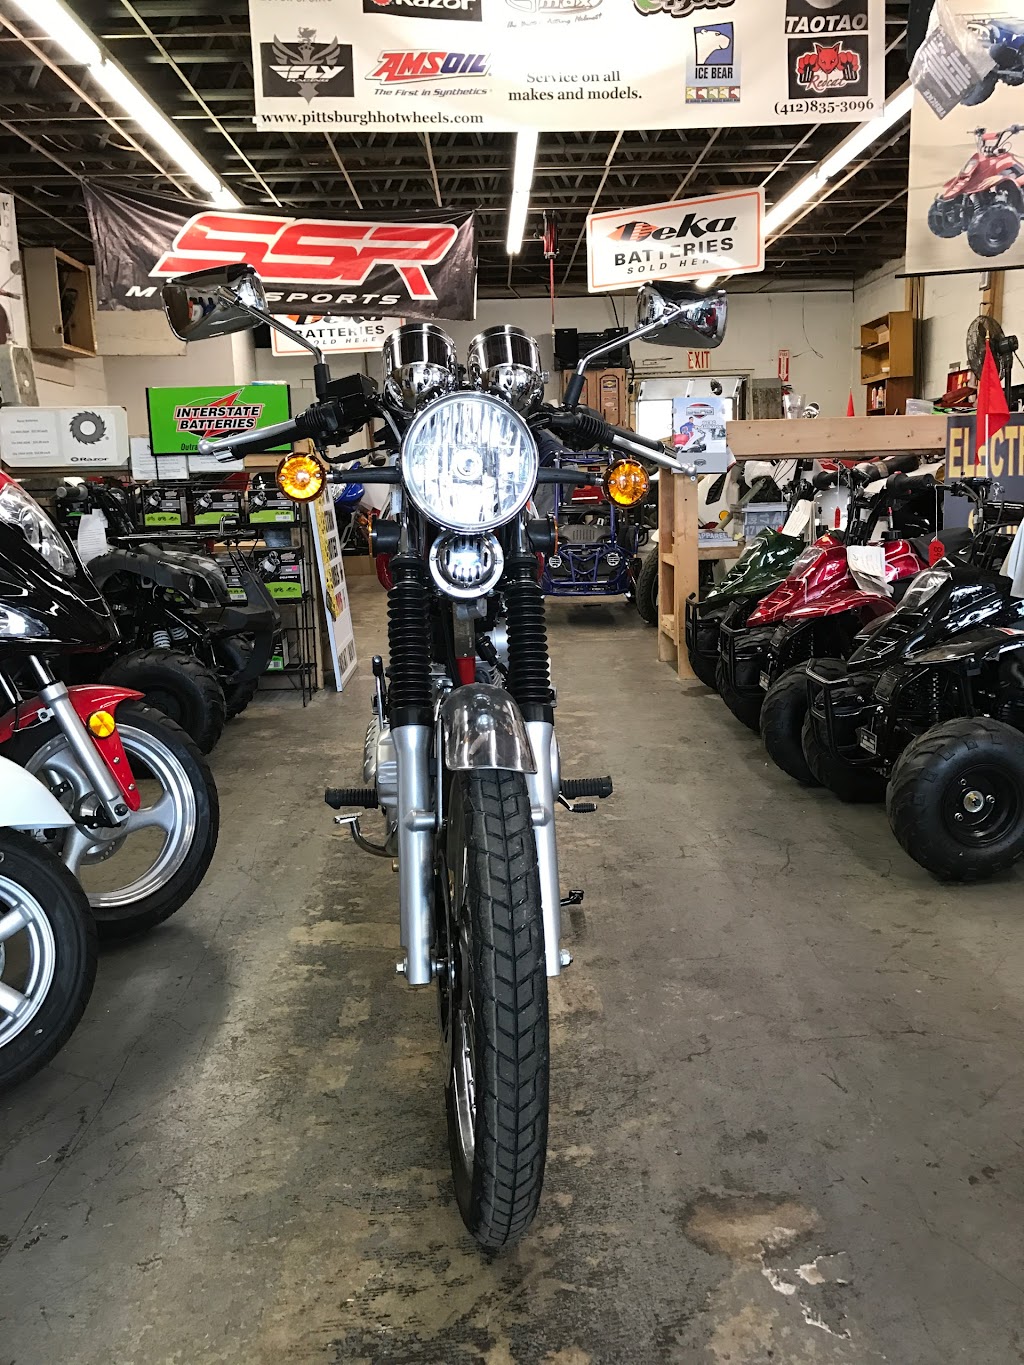 Hometown Scooters | 2947 South Park Rd, Bethel Park, PA 15102 | Phone: (412) 835-3096